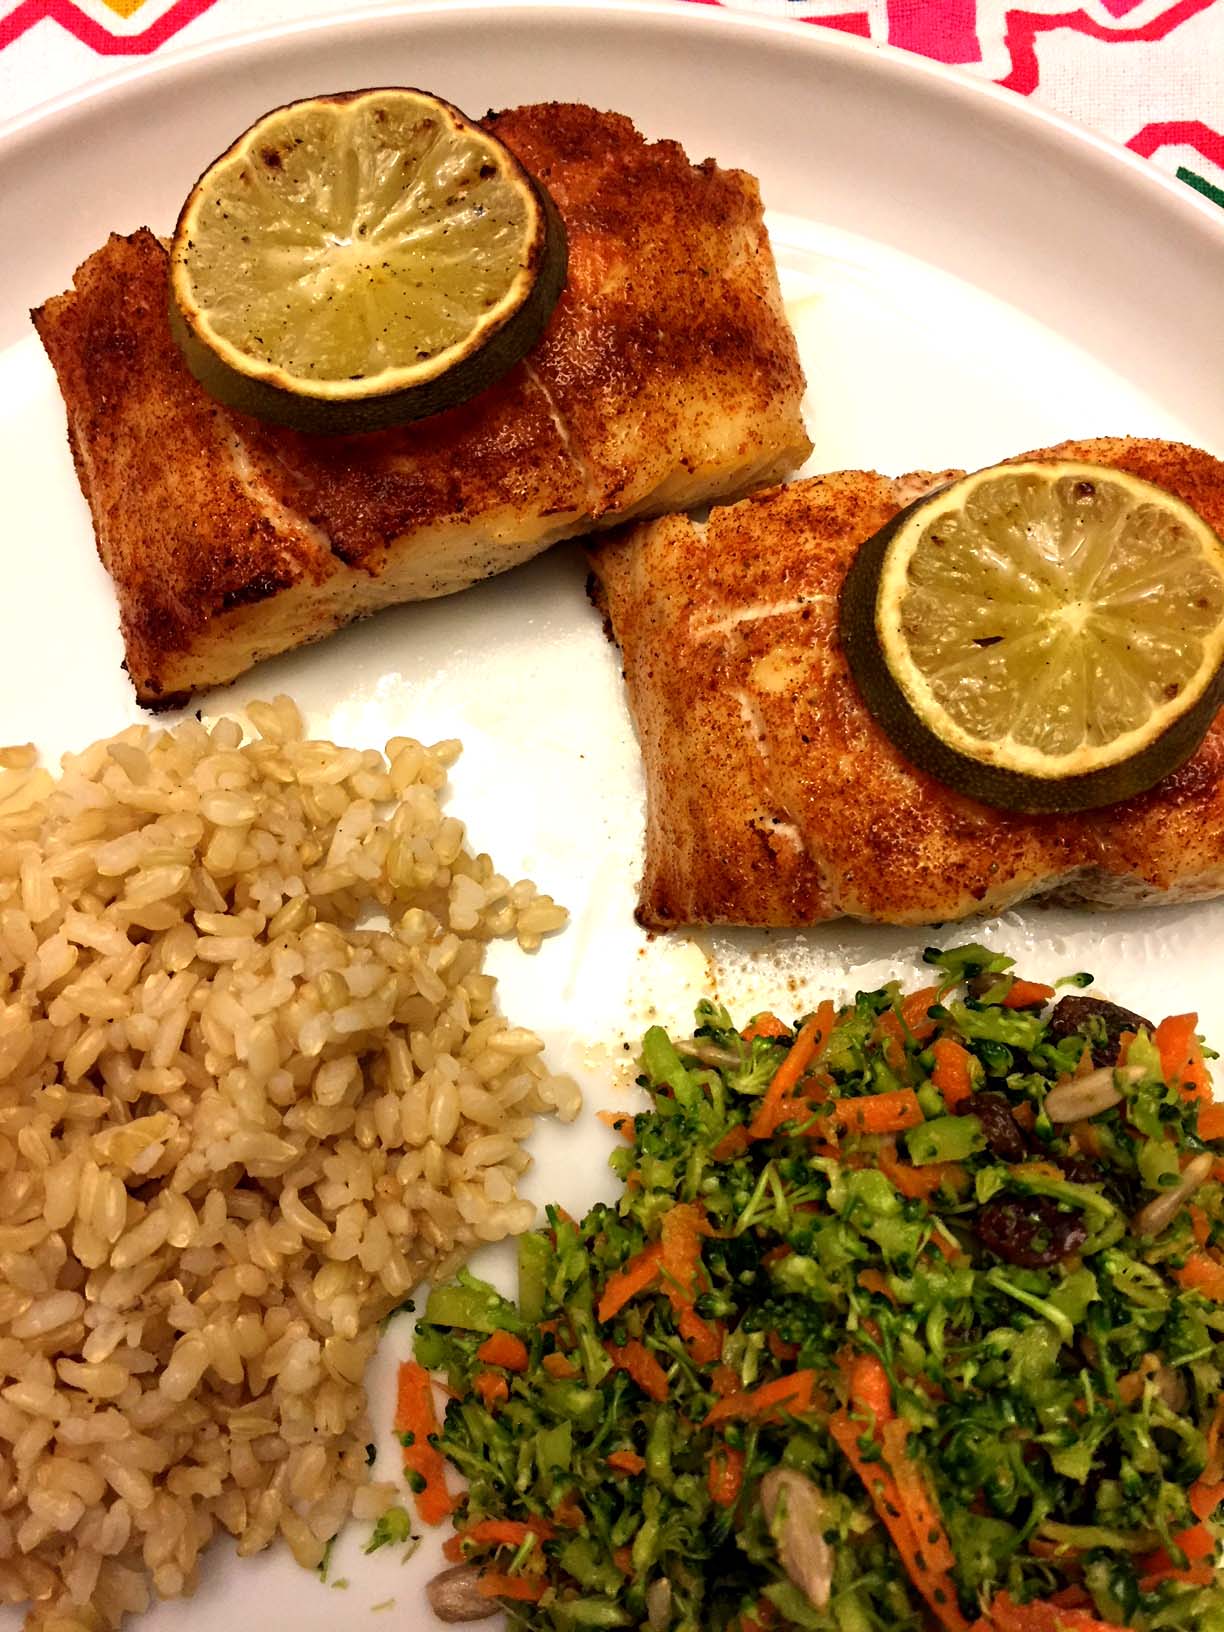 Baked Red Snapper Fillets With Chili And Lime Melanie Cooks,Rock Candy